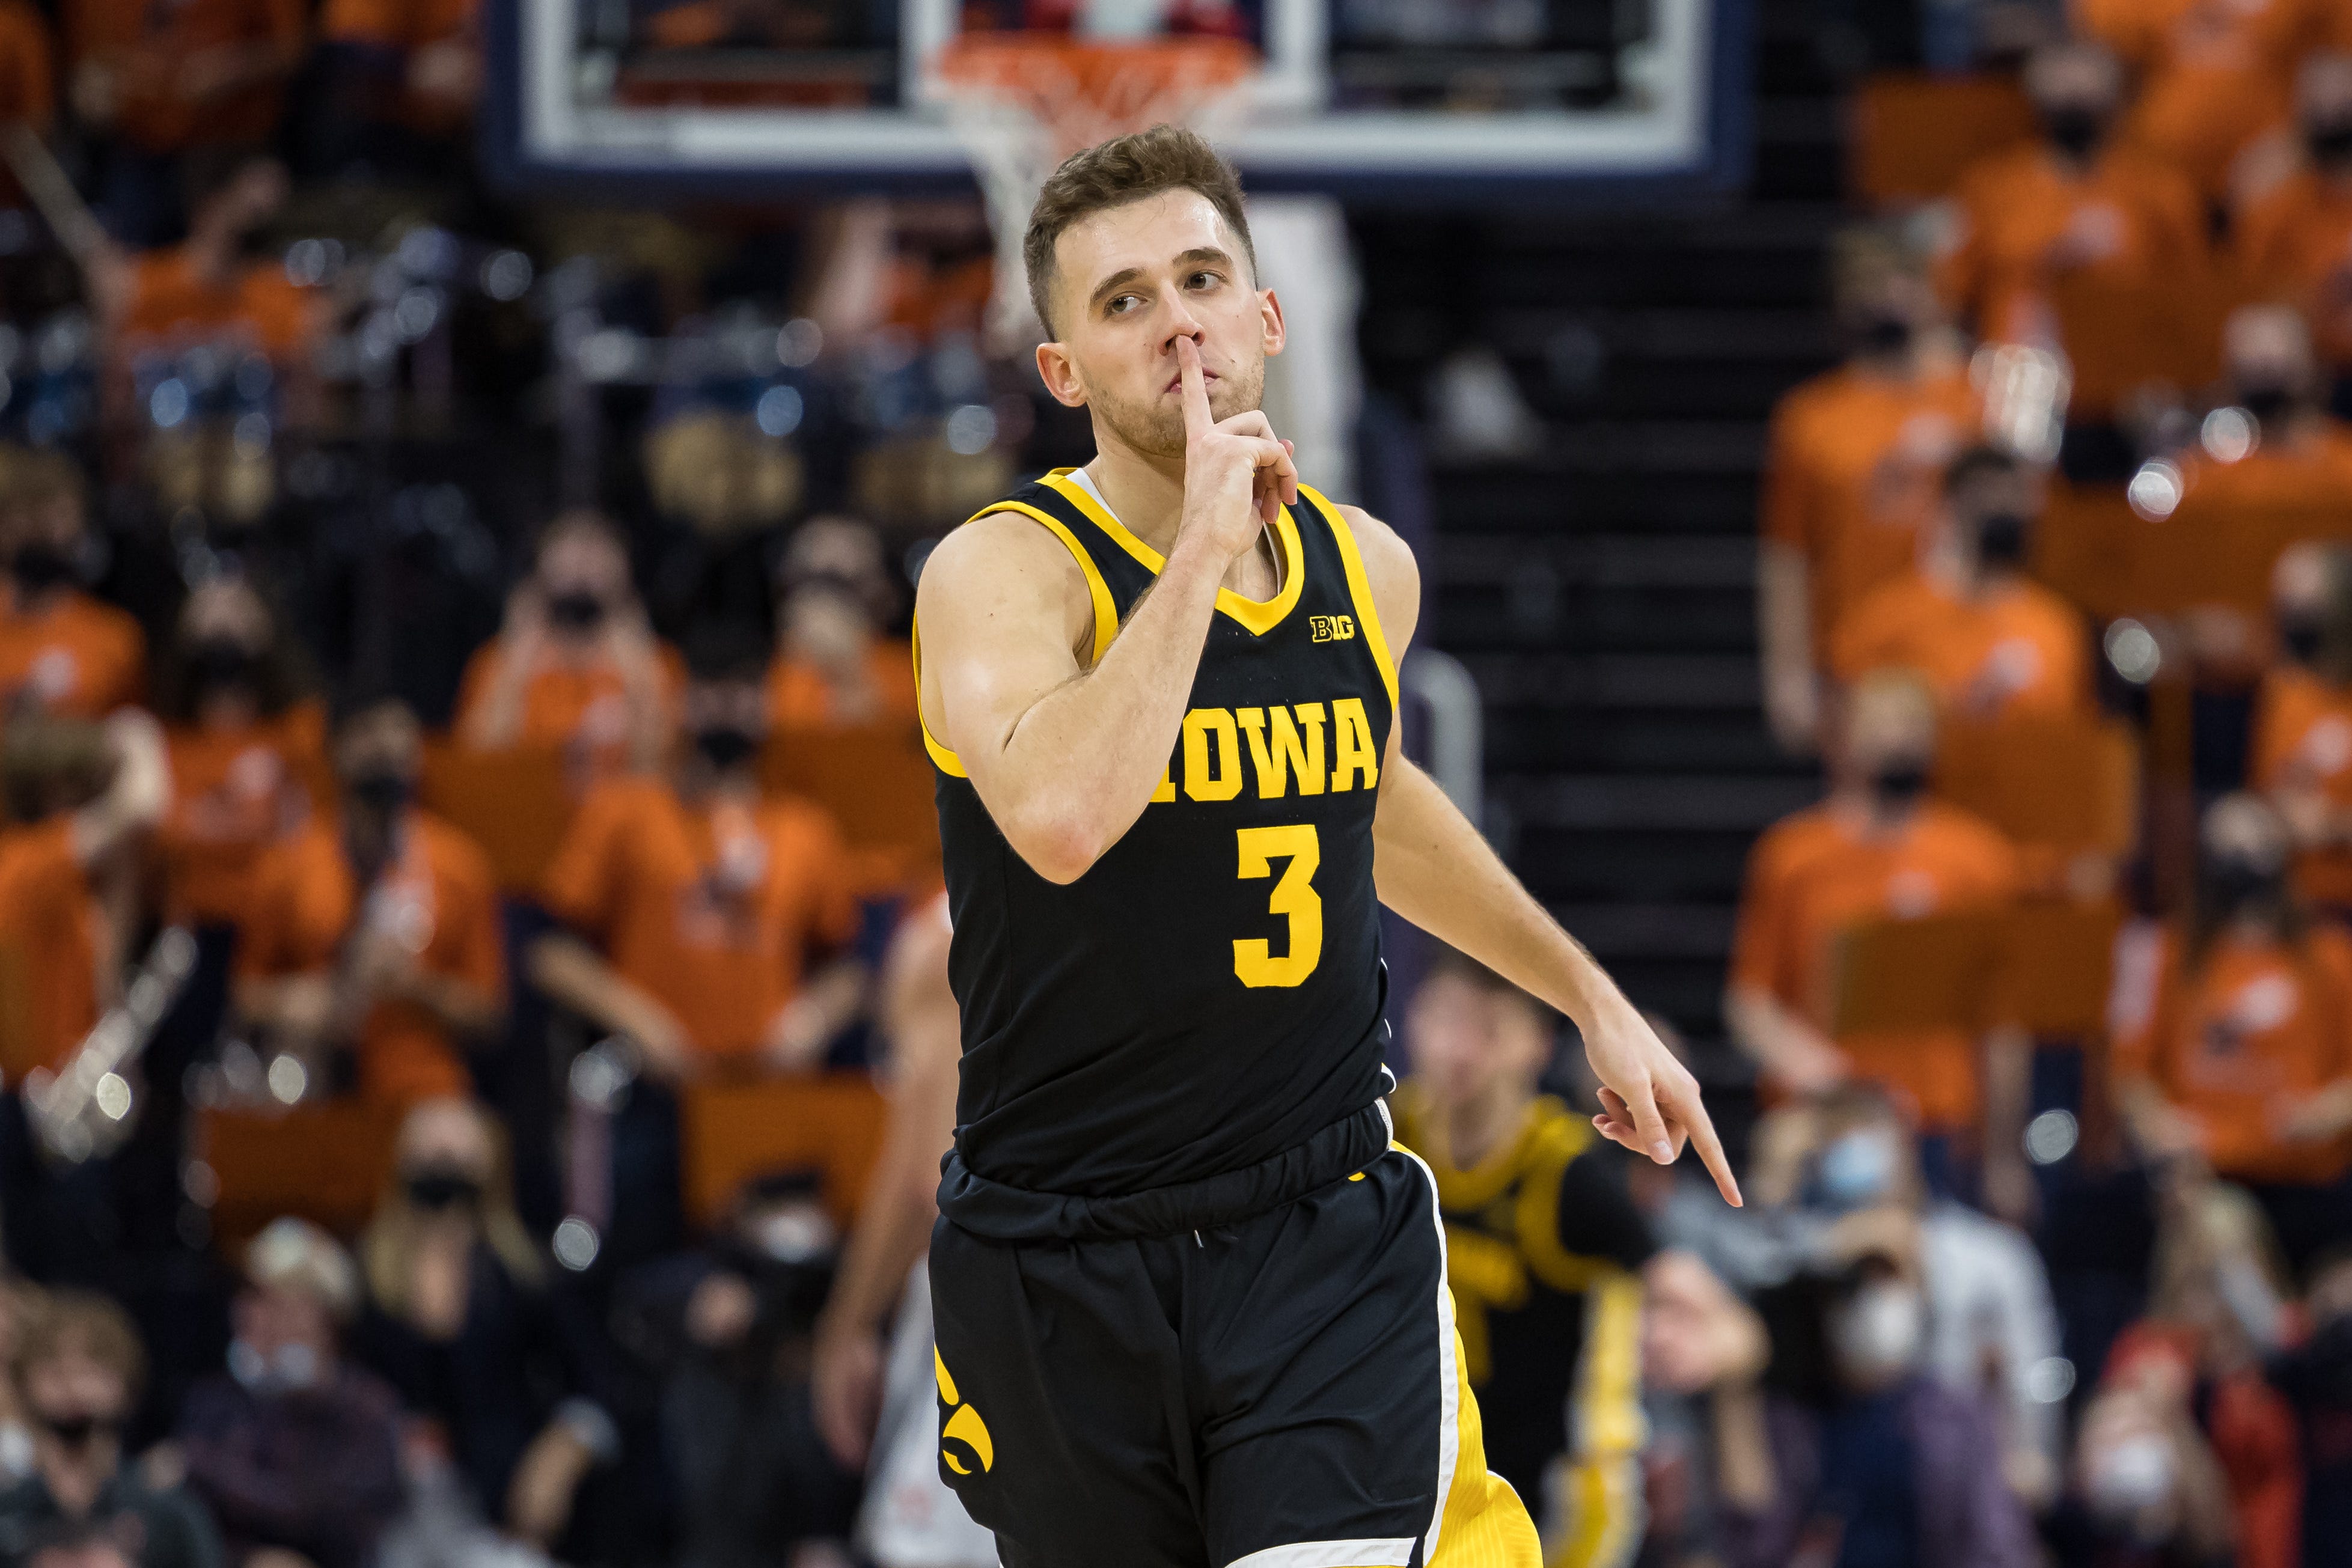 Iowa Hawkeyes guard Jordan Bohannon (3) reacts after a play against the Virginia Cavaliers during the second half, Monday, Nov. 29, 2021, at John Paul Jones Arena in Charlottesville, Va.